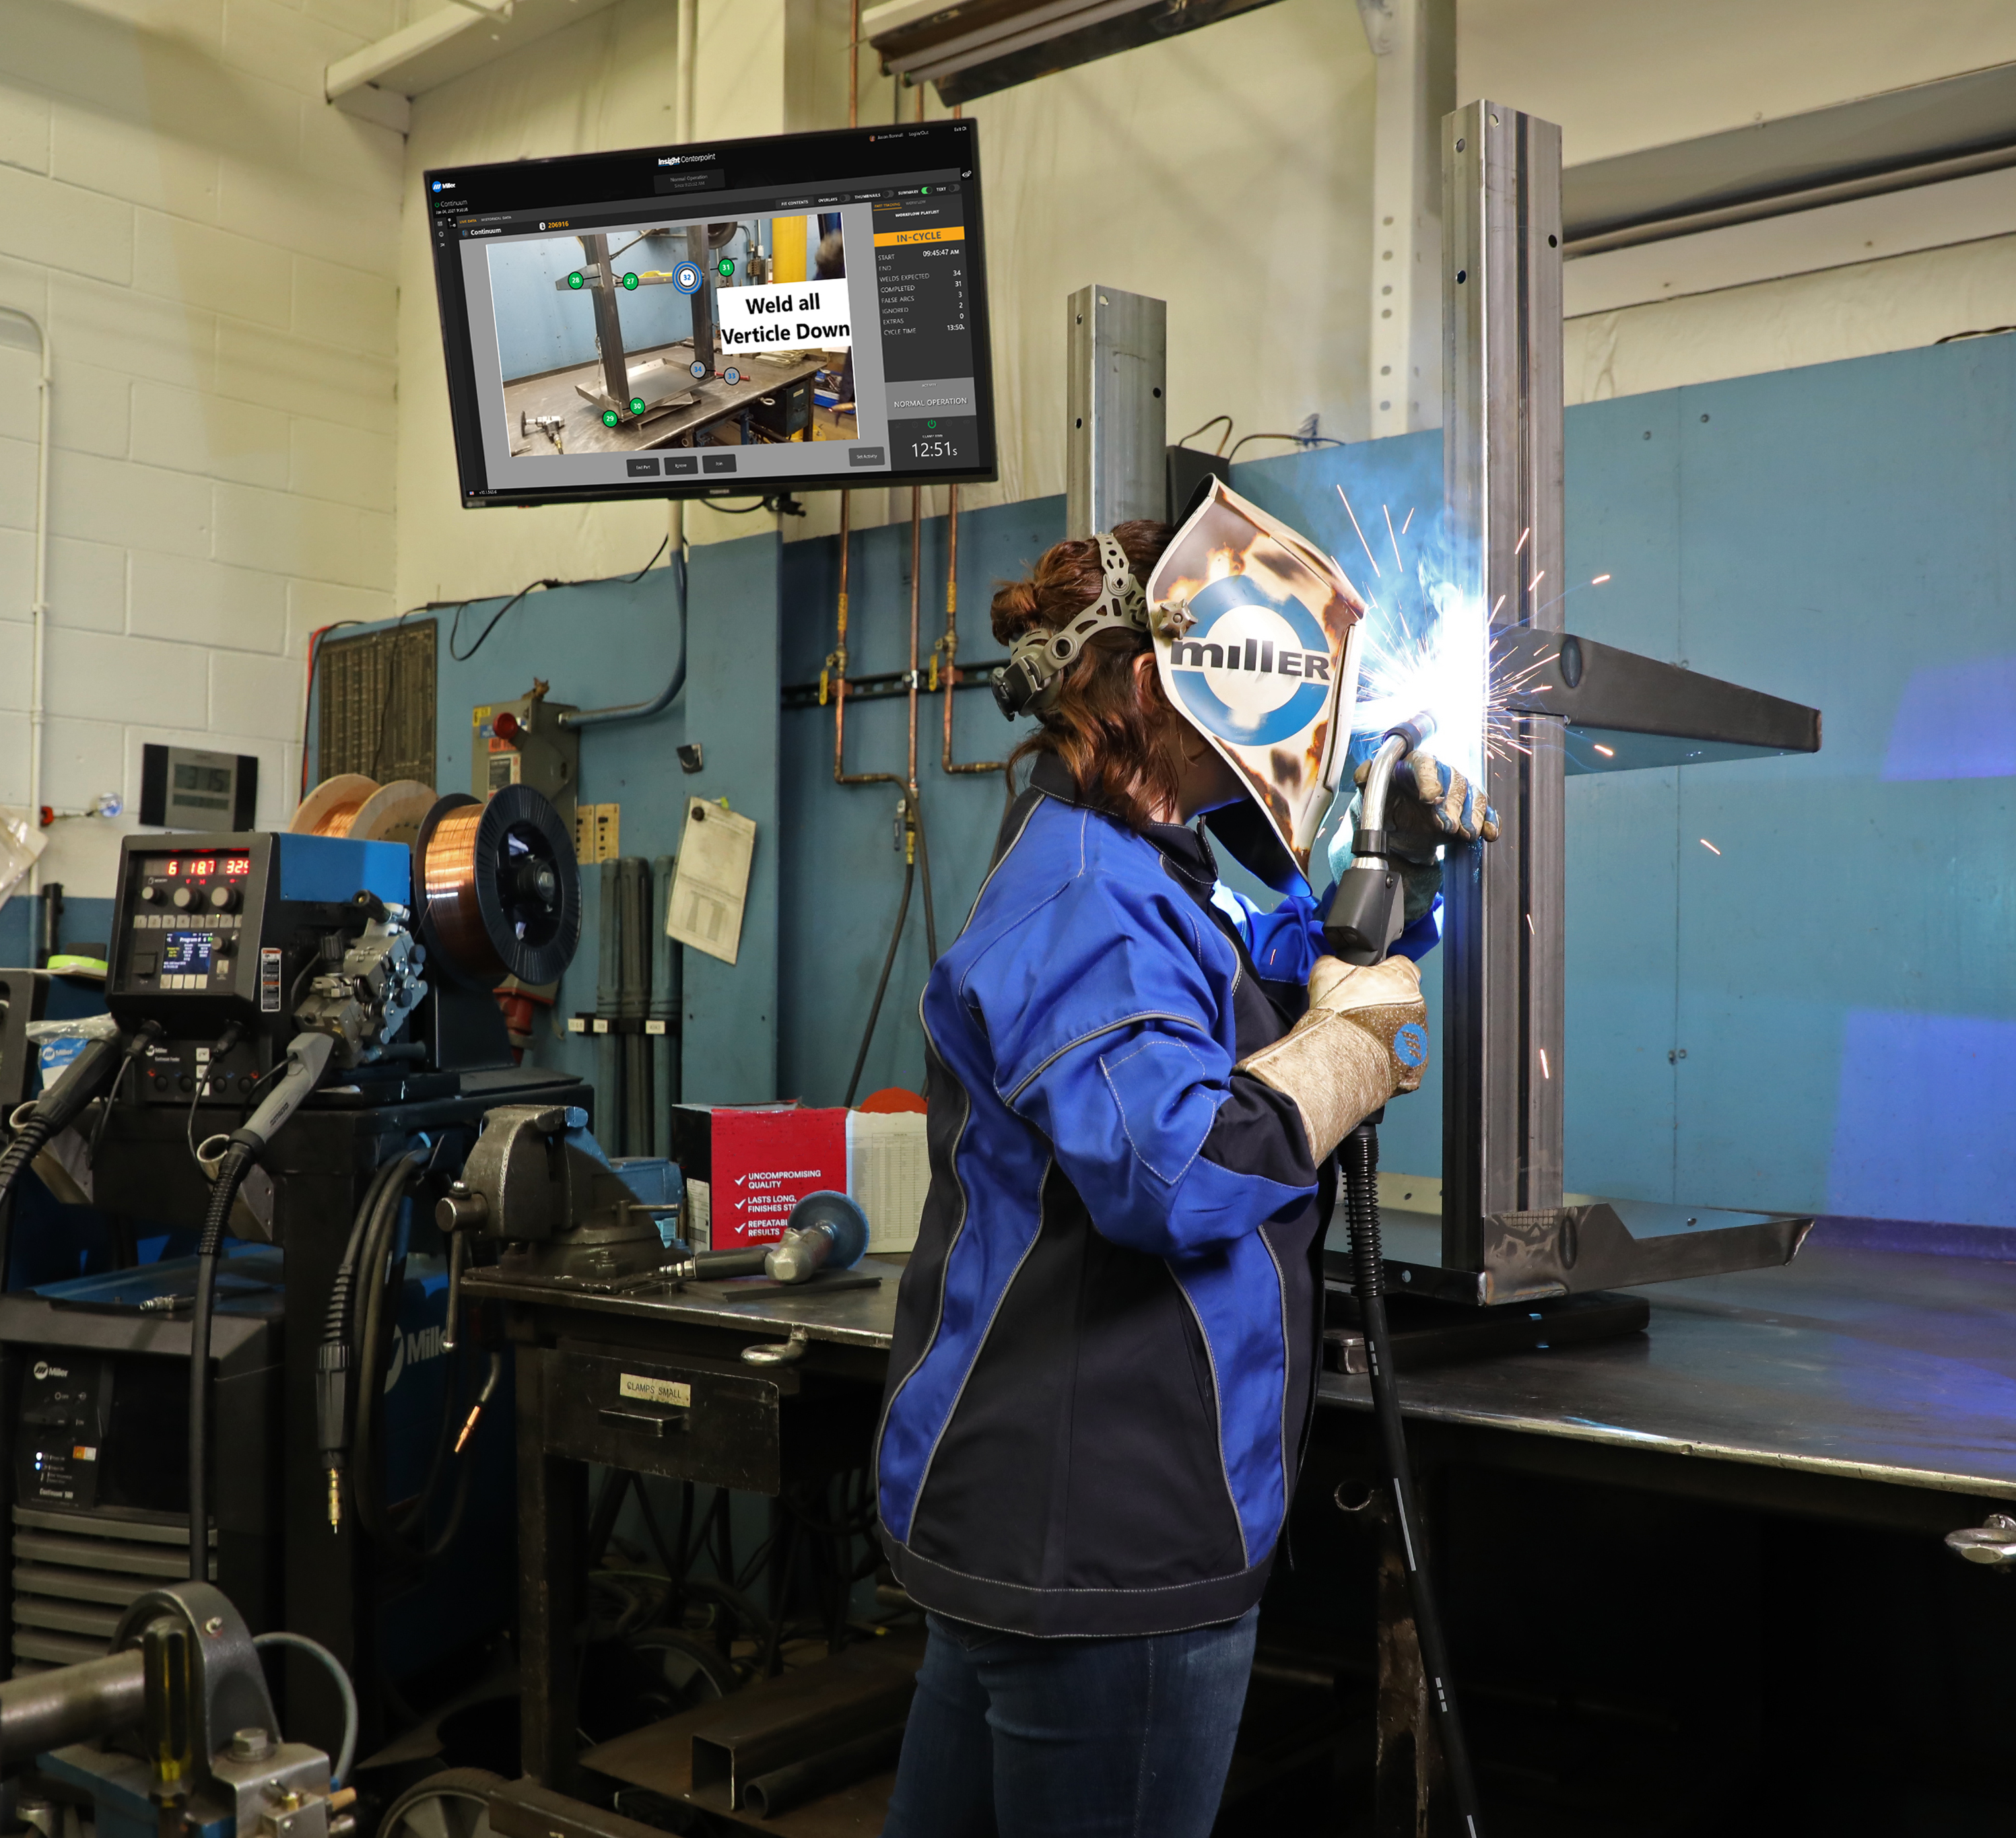 An operator welds and receives real-time feedback on a screen